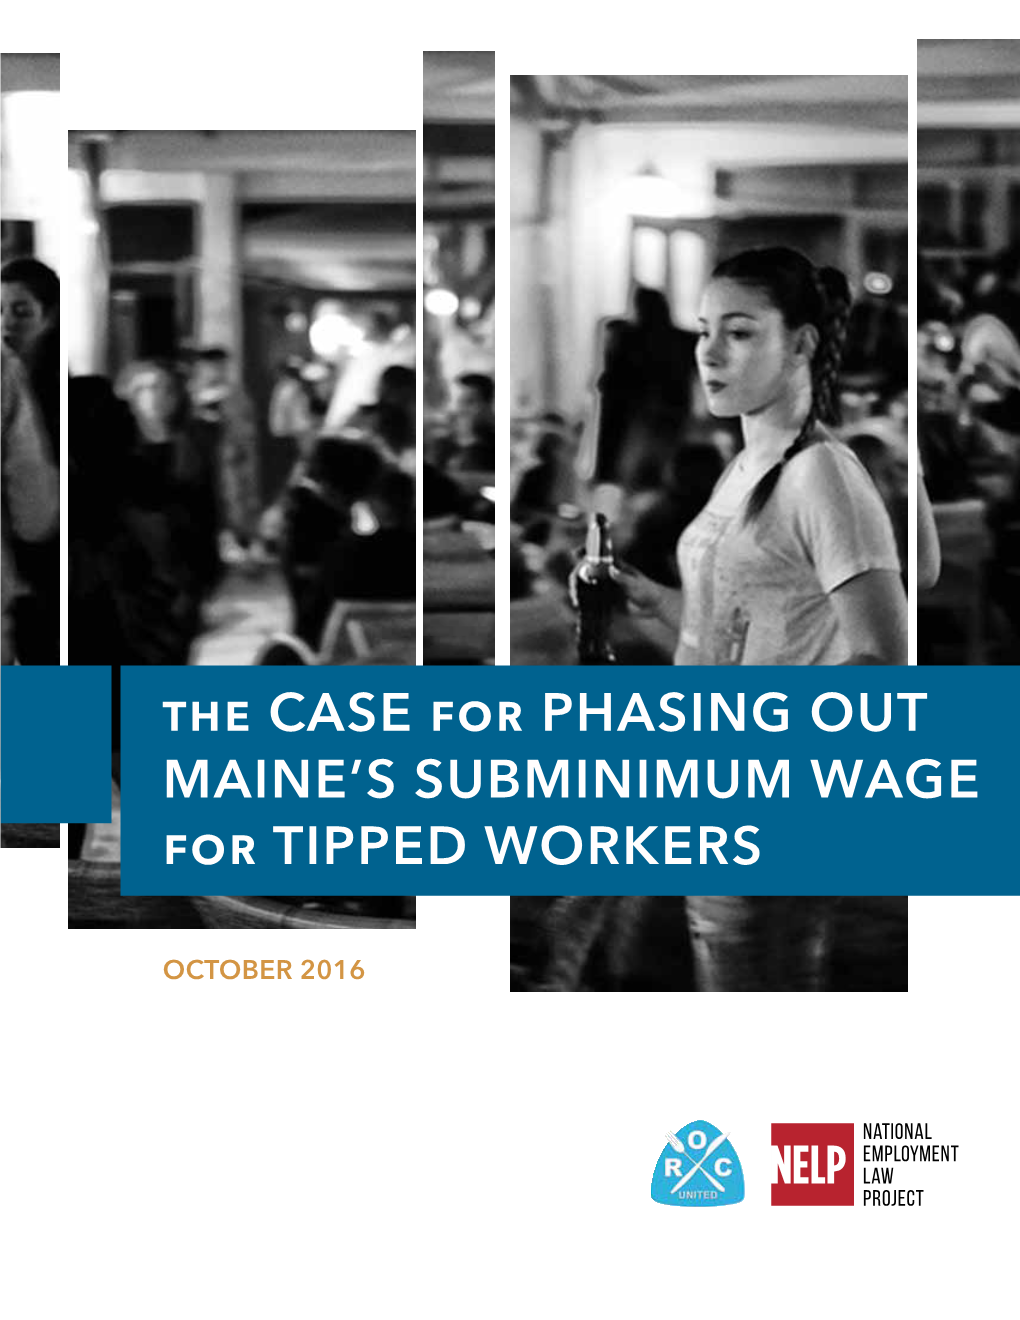 The Case for Phasing out Maine's Subminimum Wage For